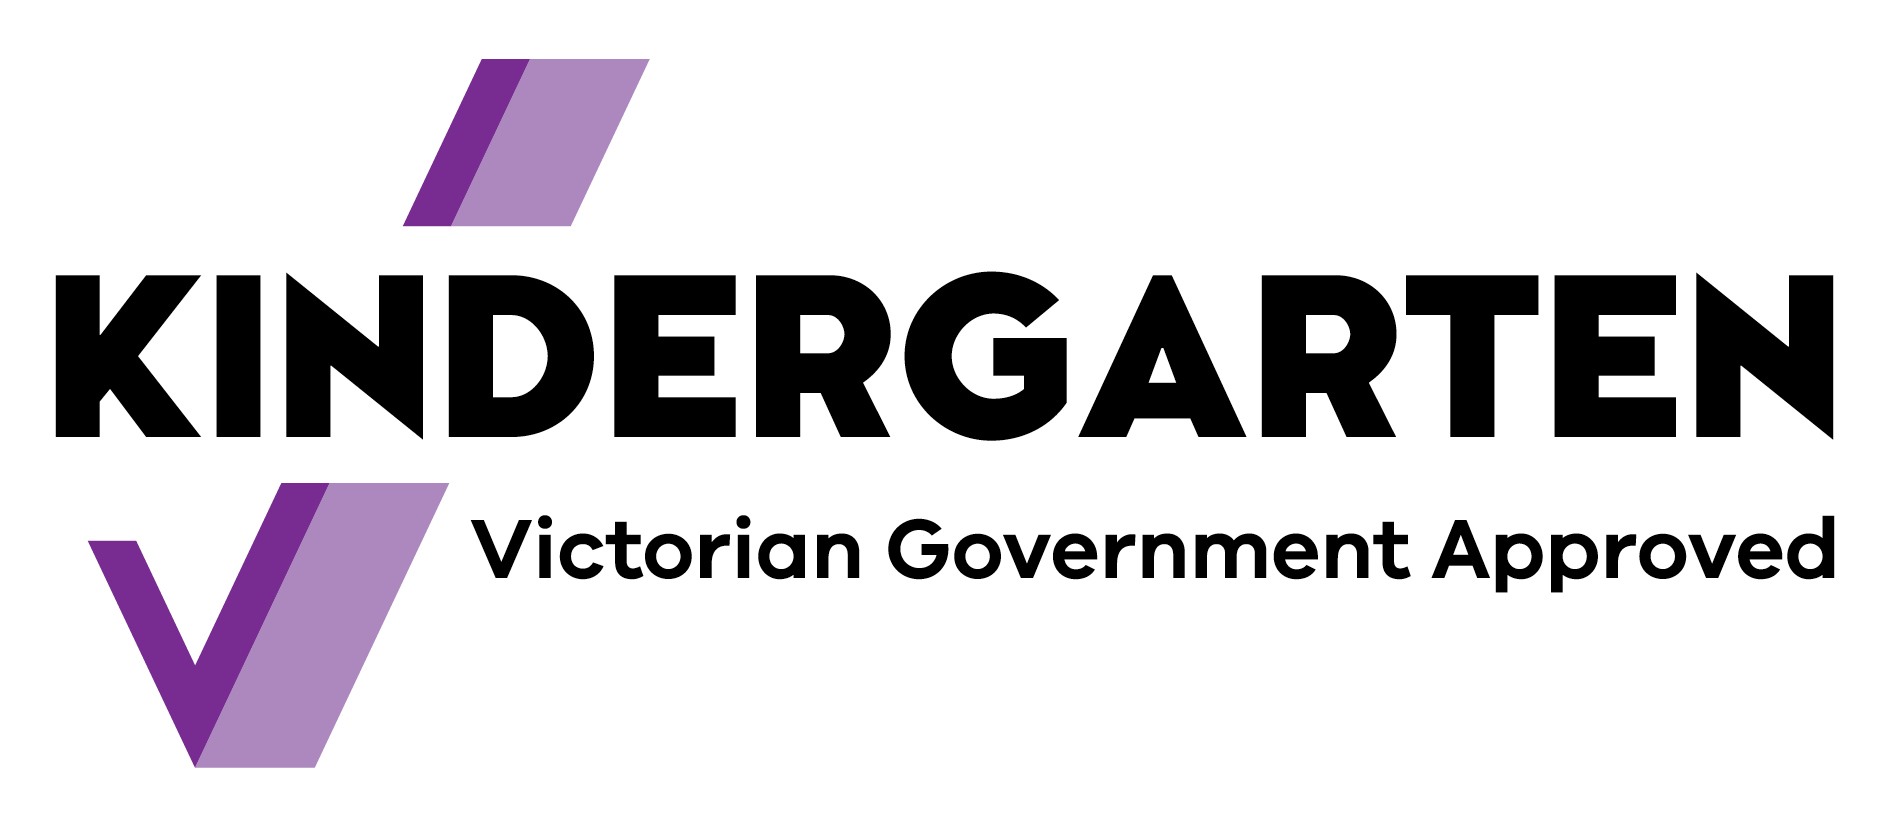 Victorian Government approved kindergarten